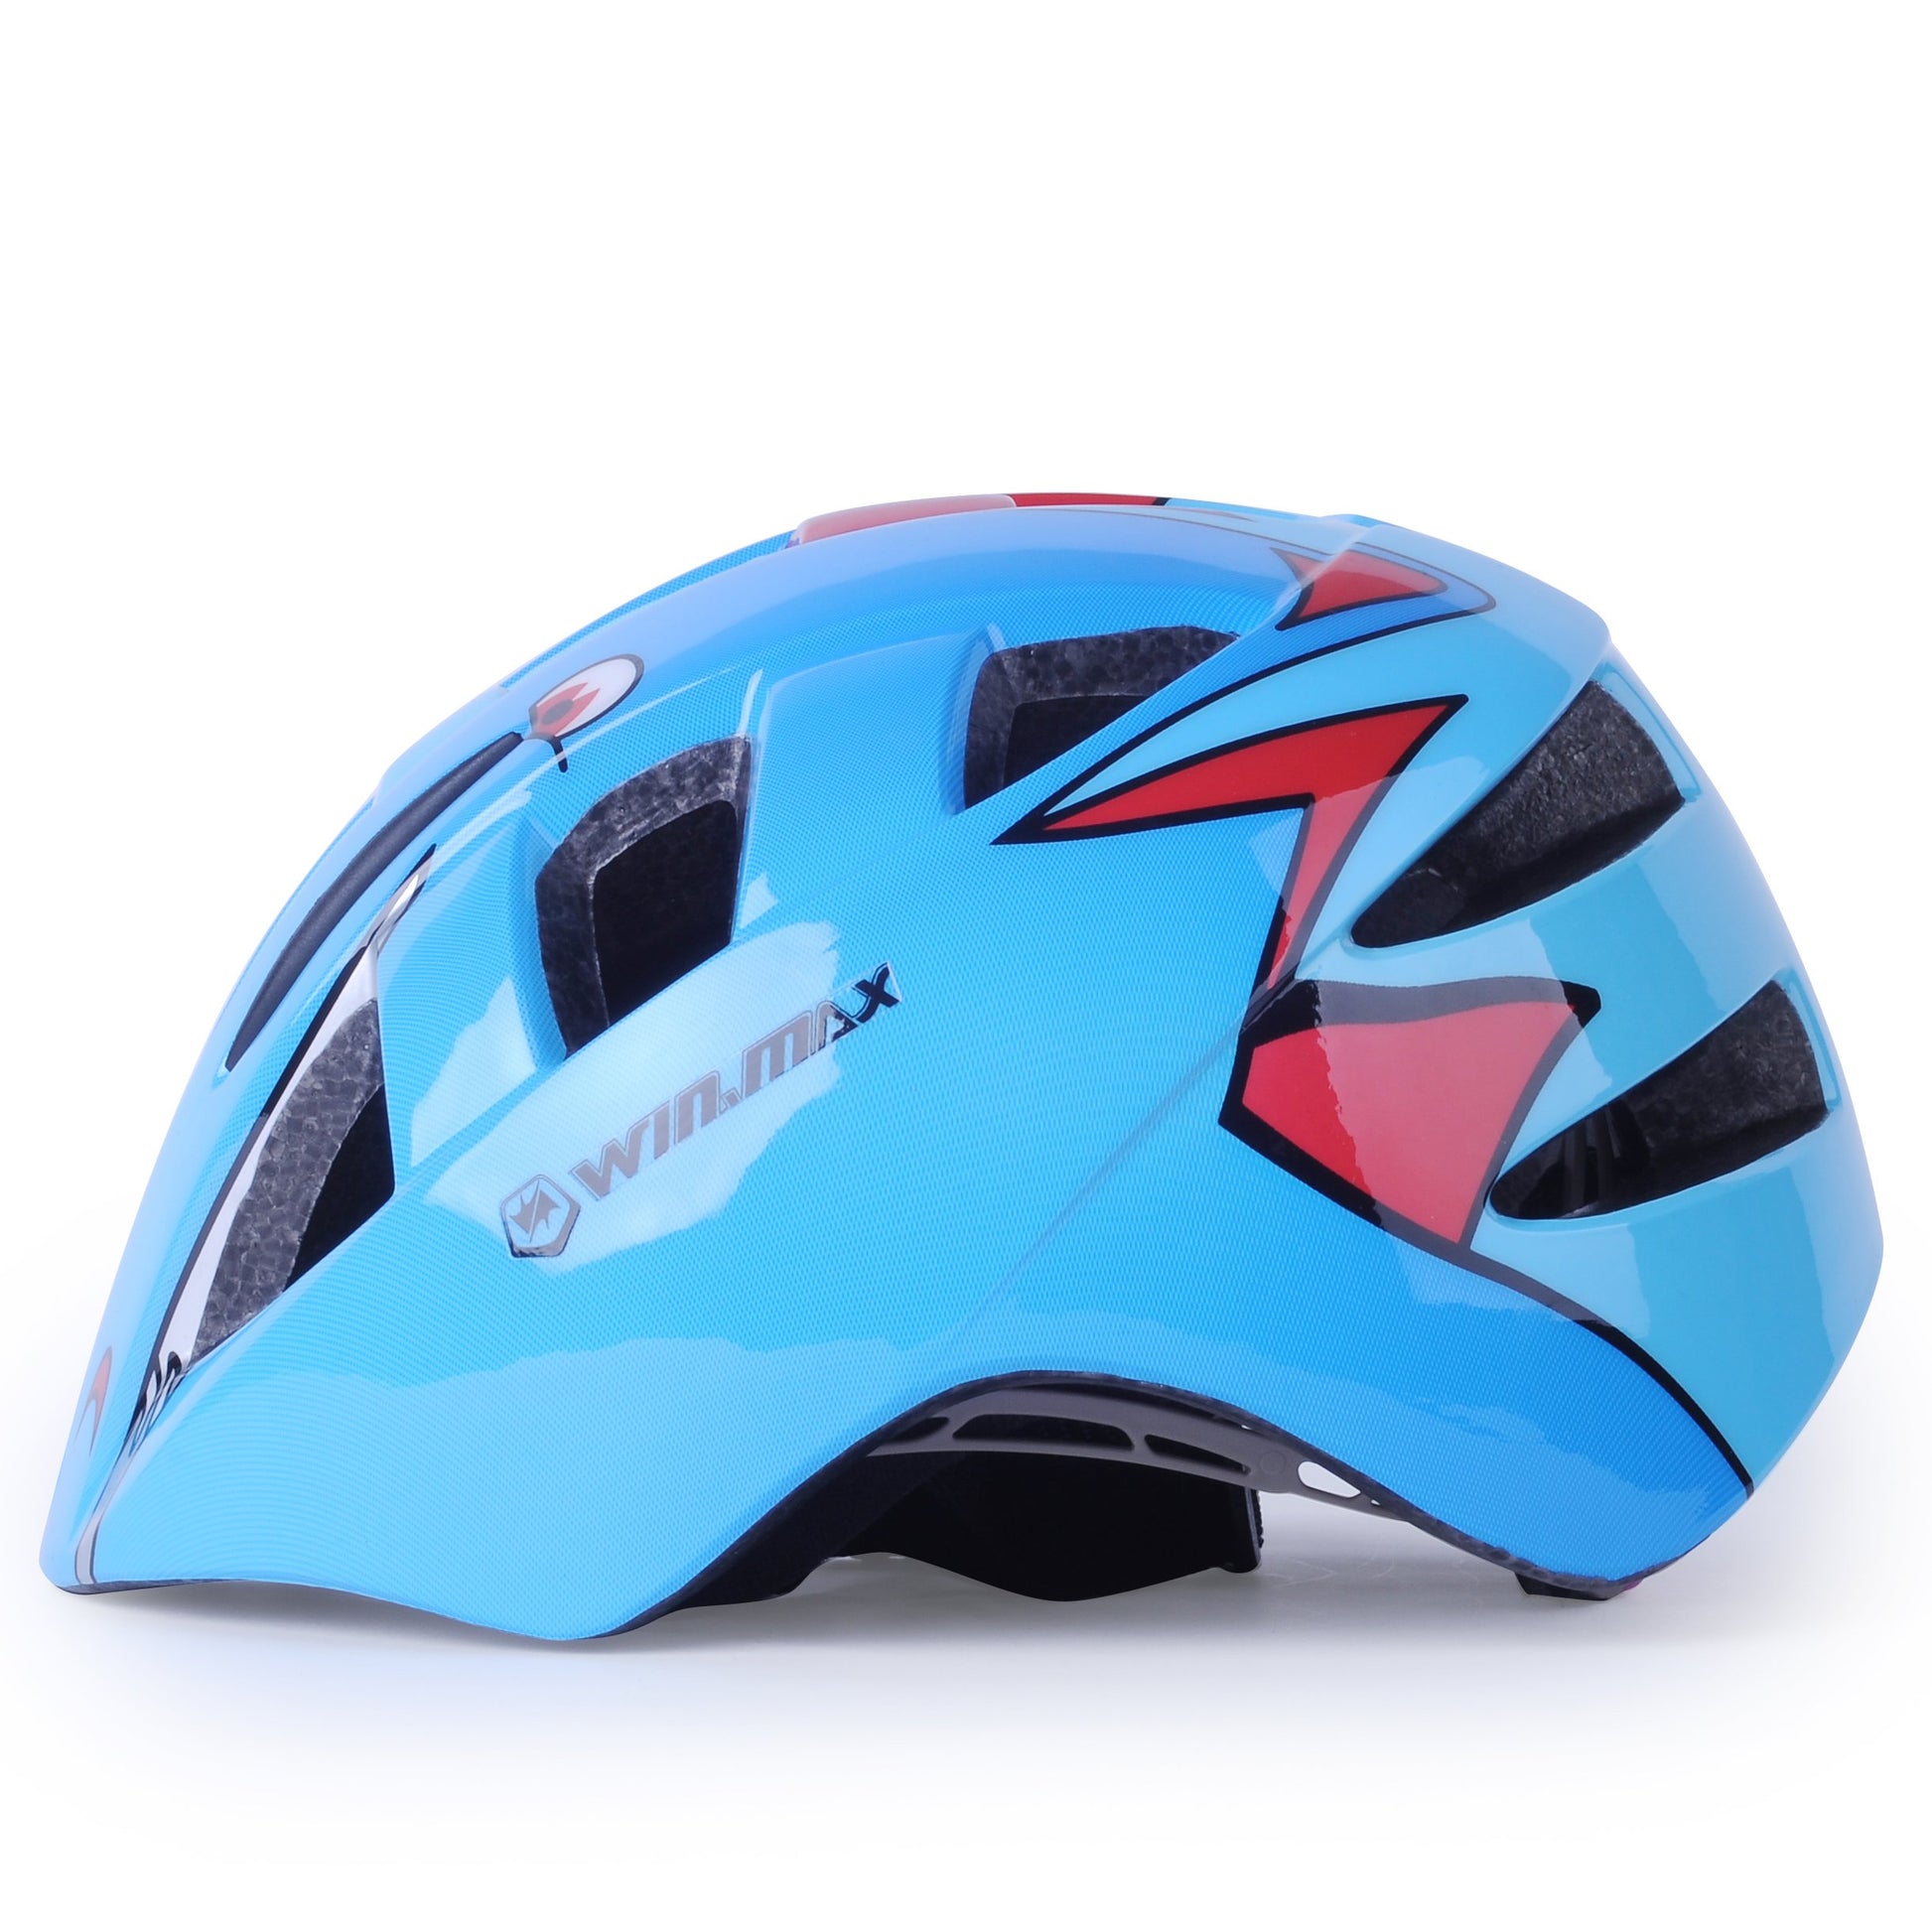 Winmax Kids Cycling Helmet Blue Right Side View